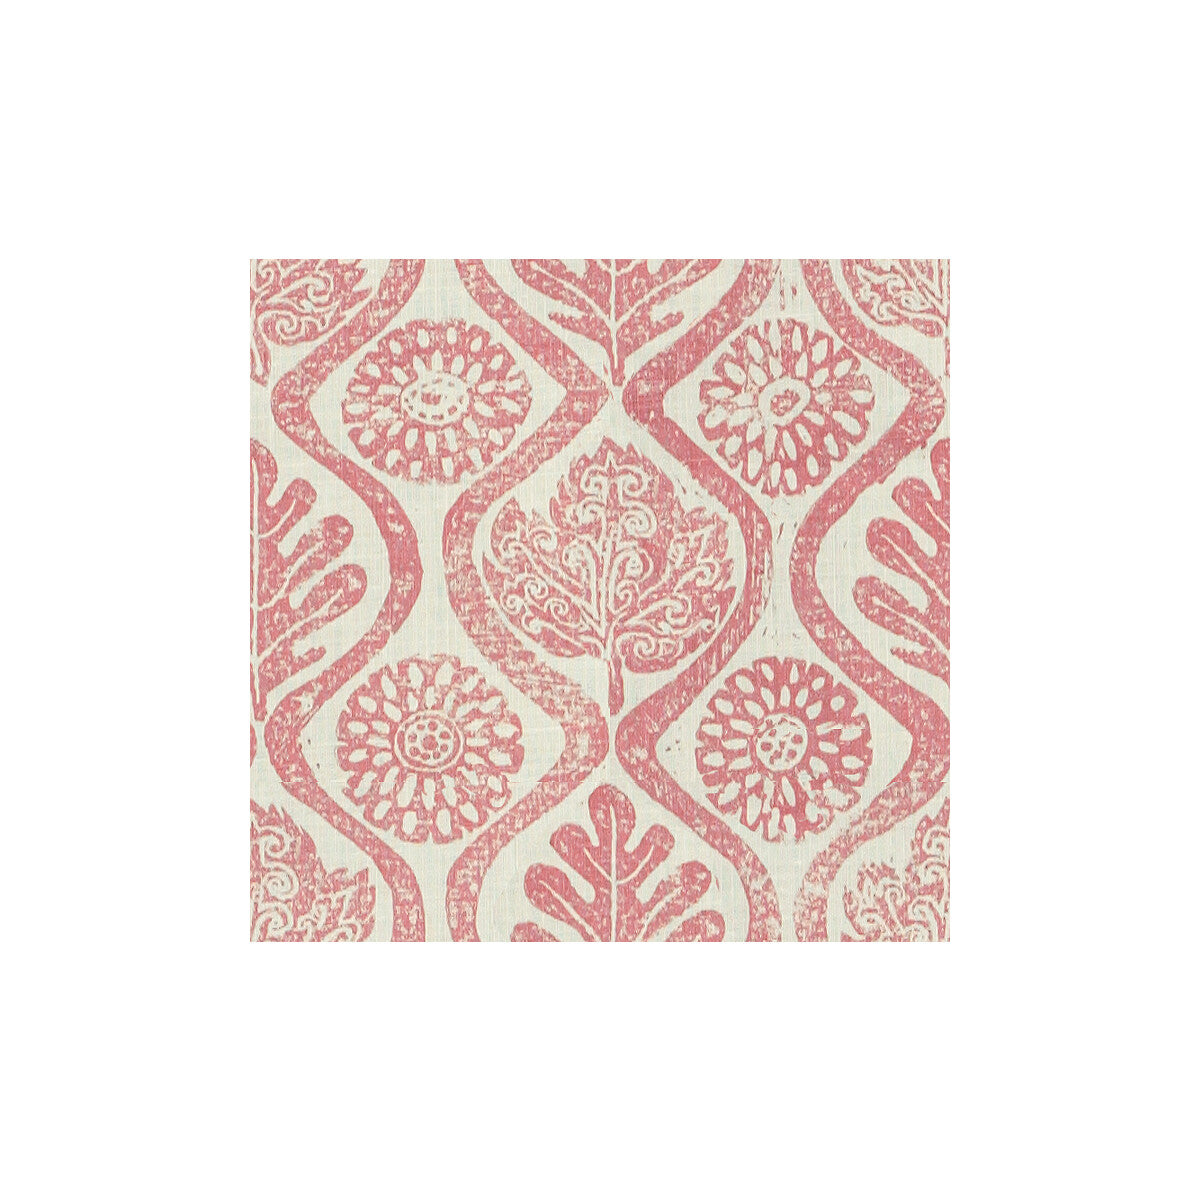 Oakleaves fabric in pink color - pattern BFC-3514.79.0 - by Lee Jofa in the Blithfield collection